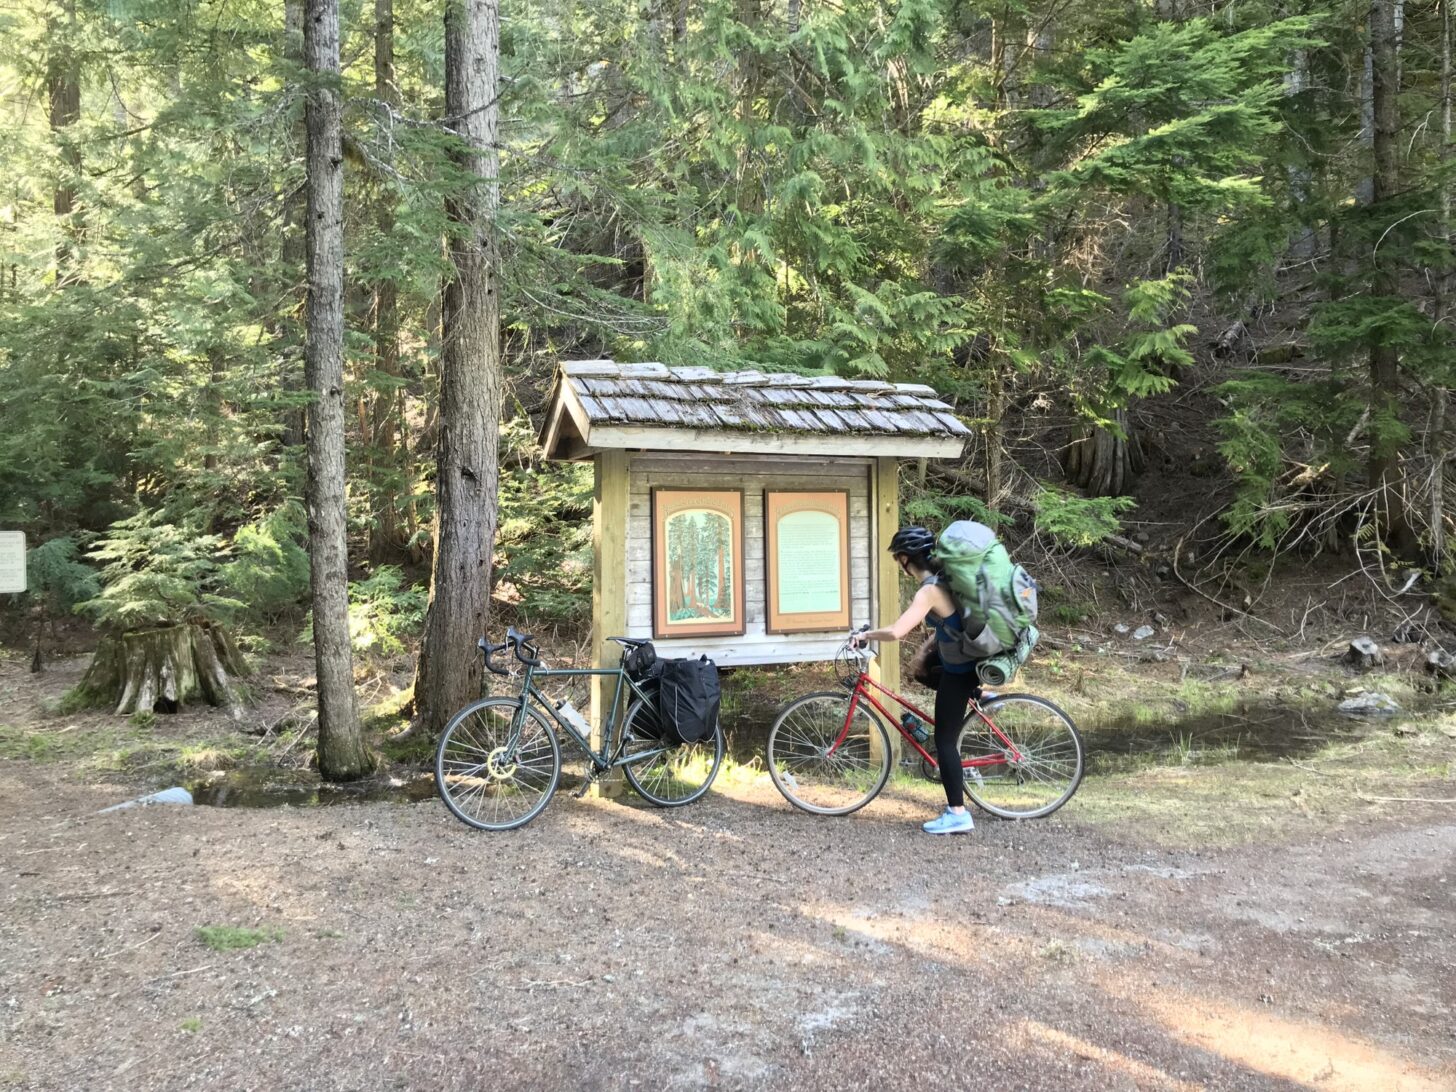 a woman stradles a bicycle and reads a trail sign at the trailhead in a peaceful forest